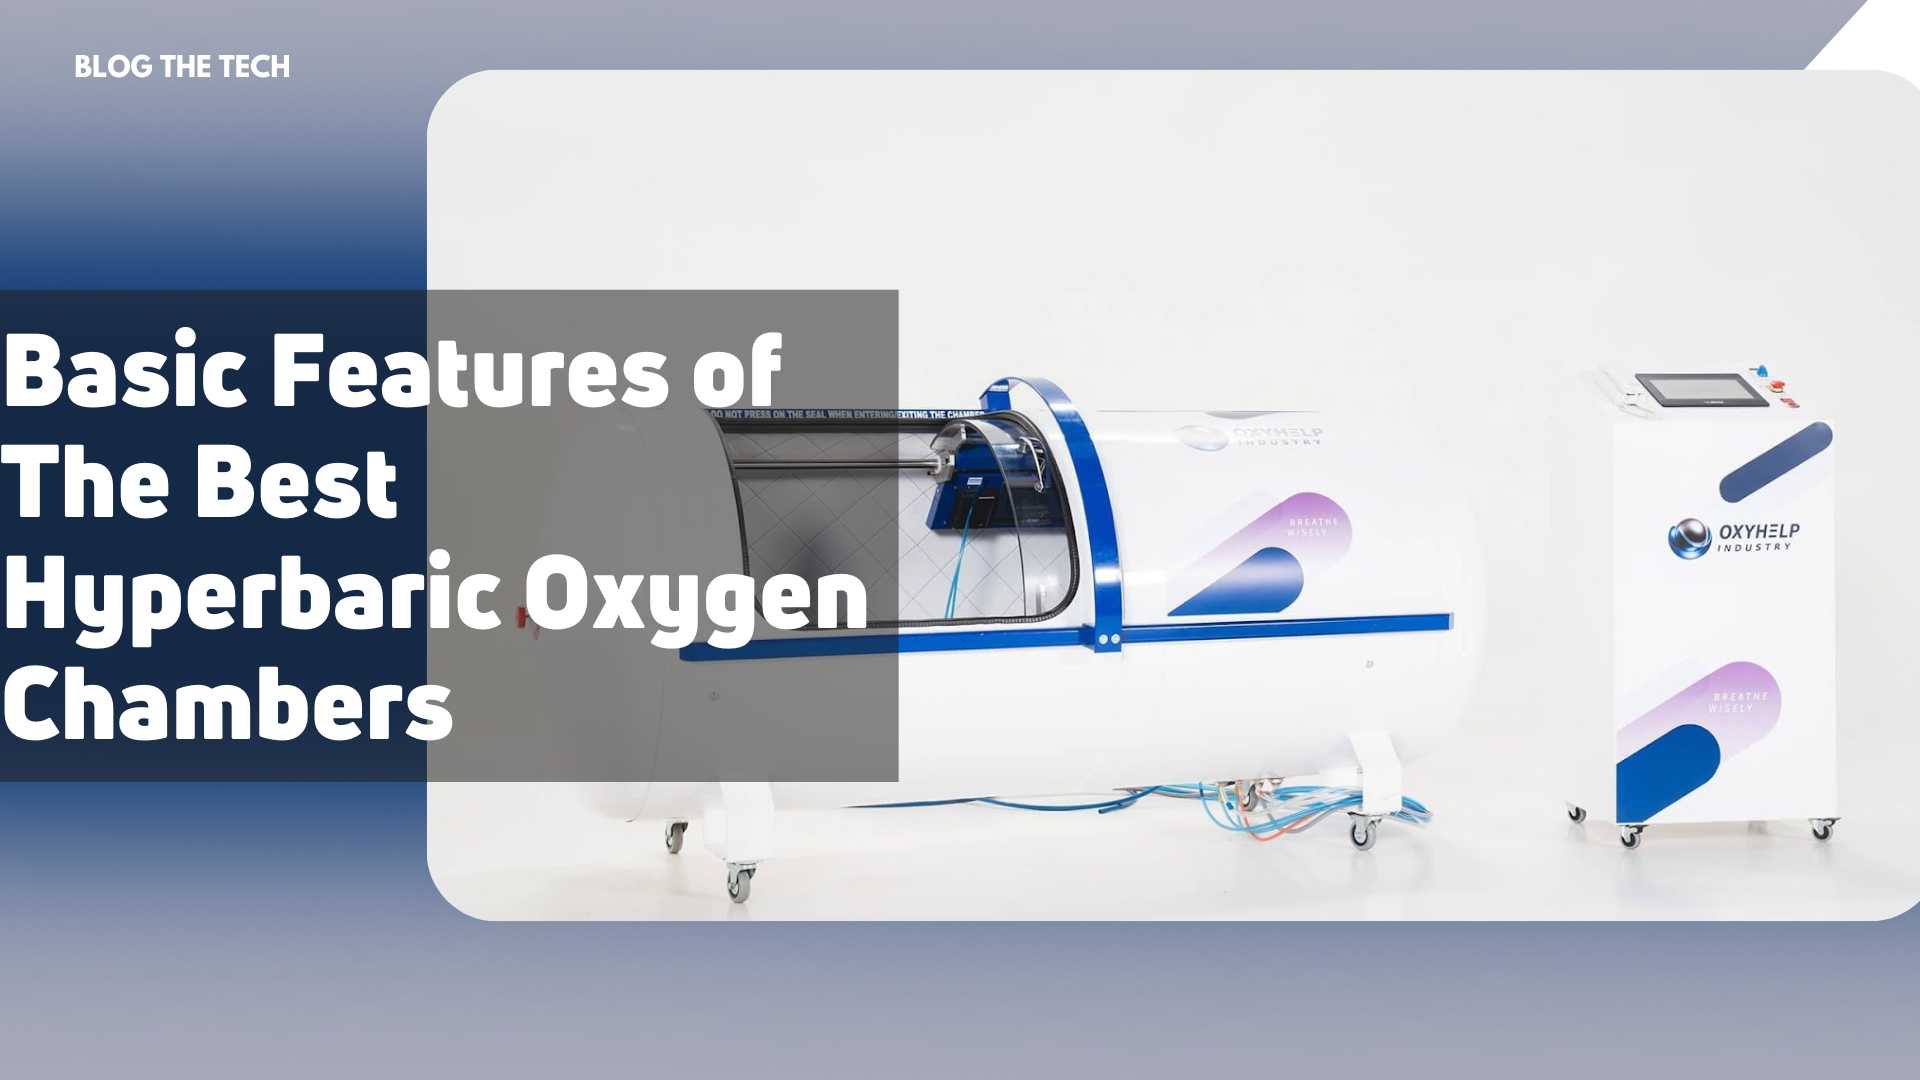 Basic Features of The Best Hyperbaric Oxygen Chambers